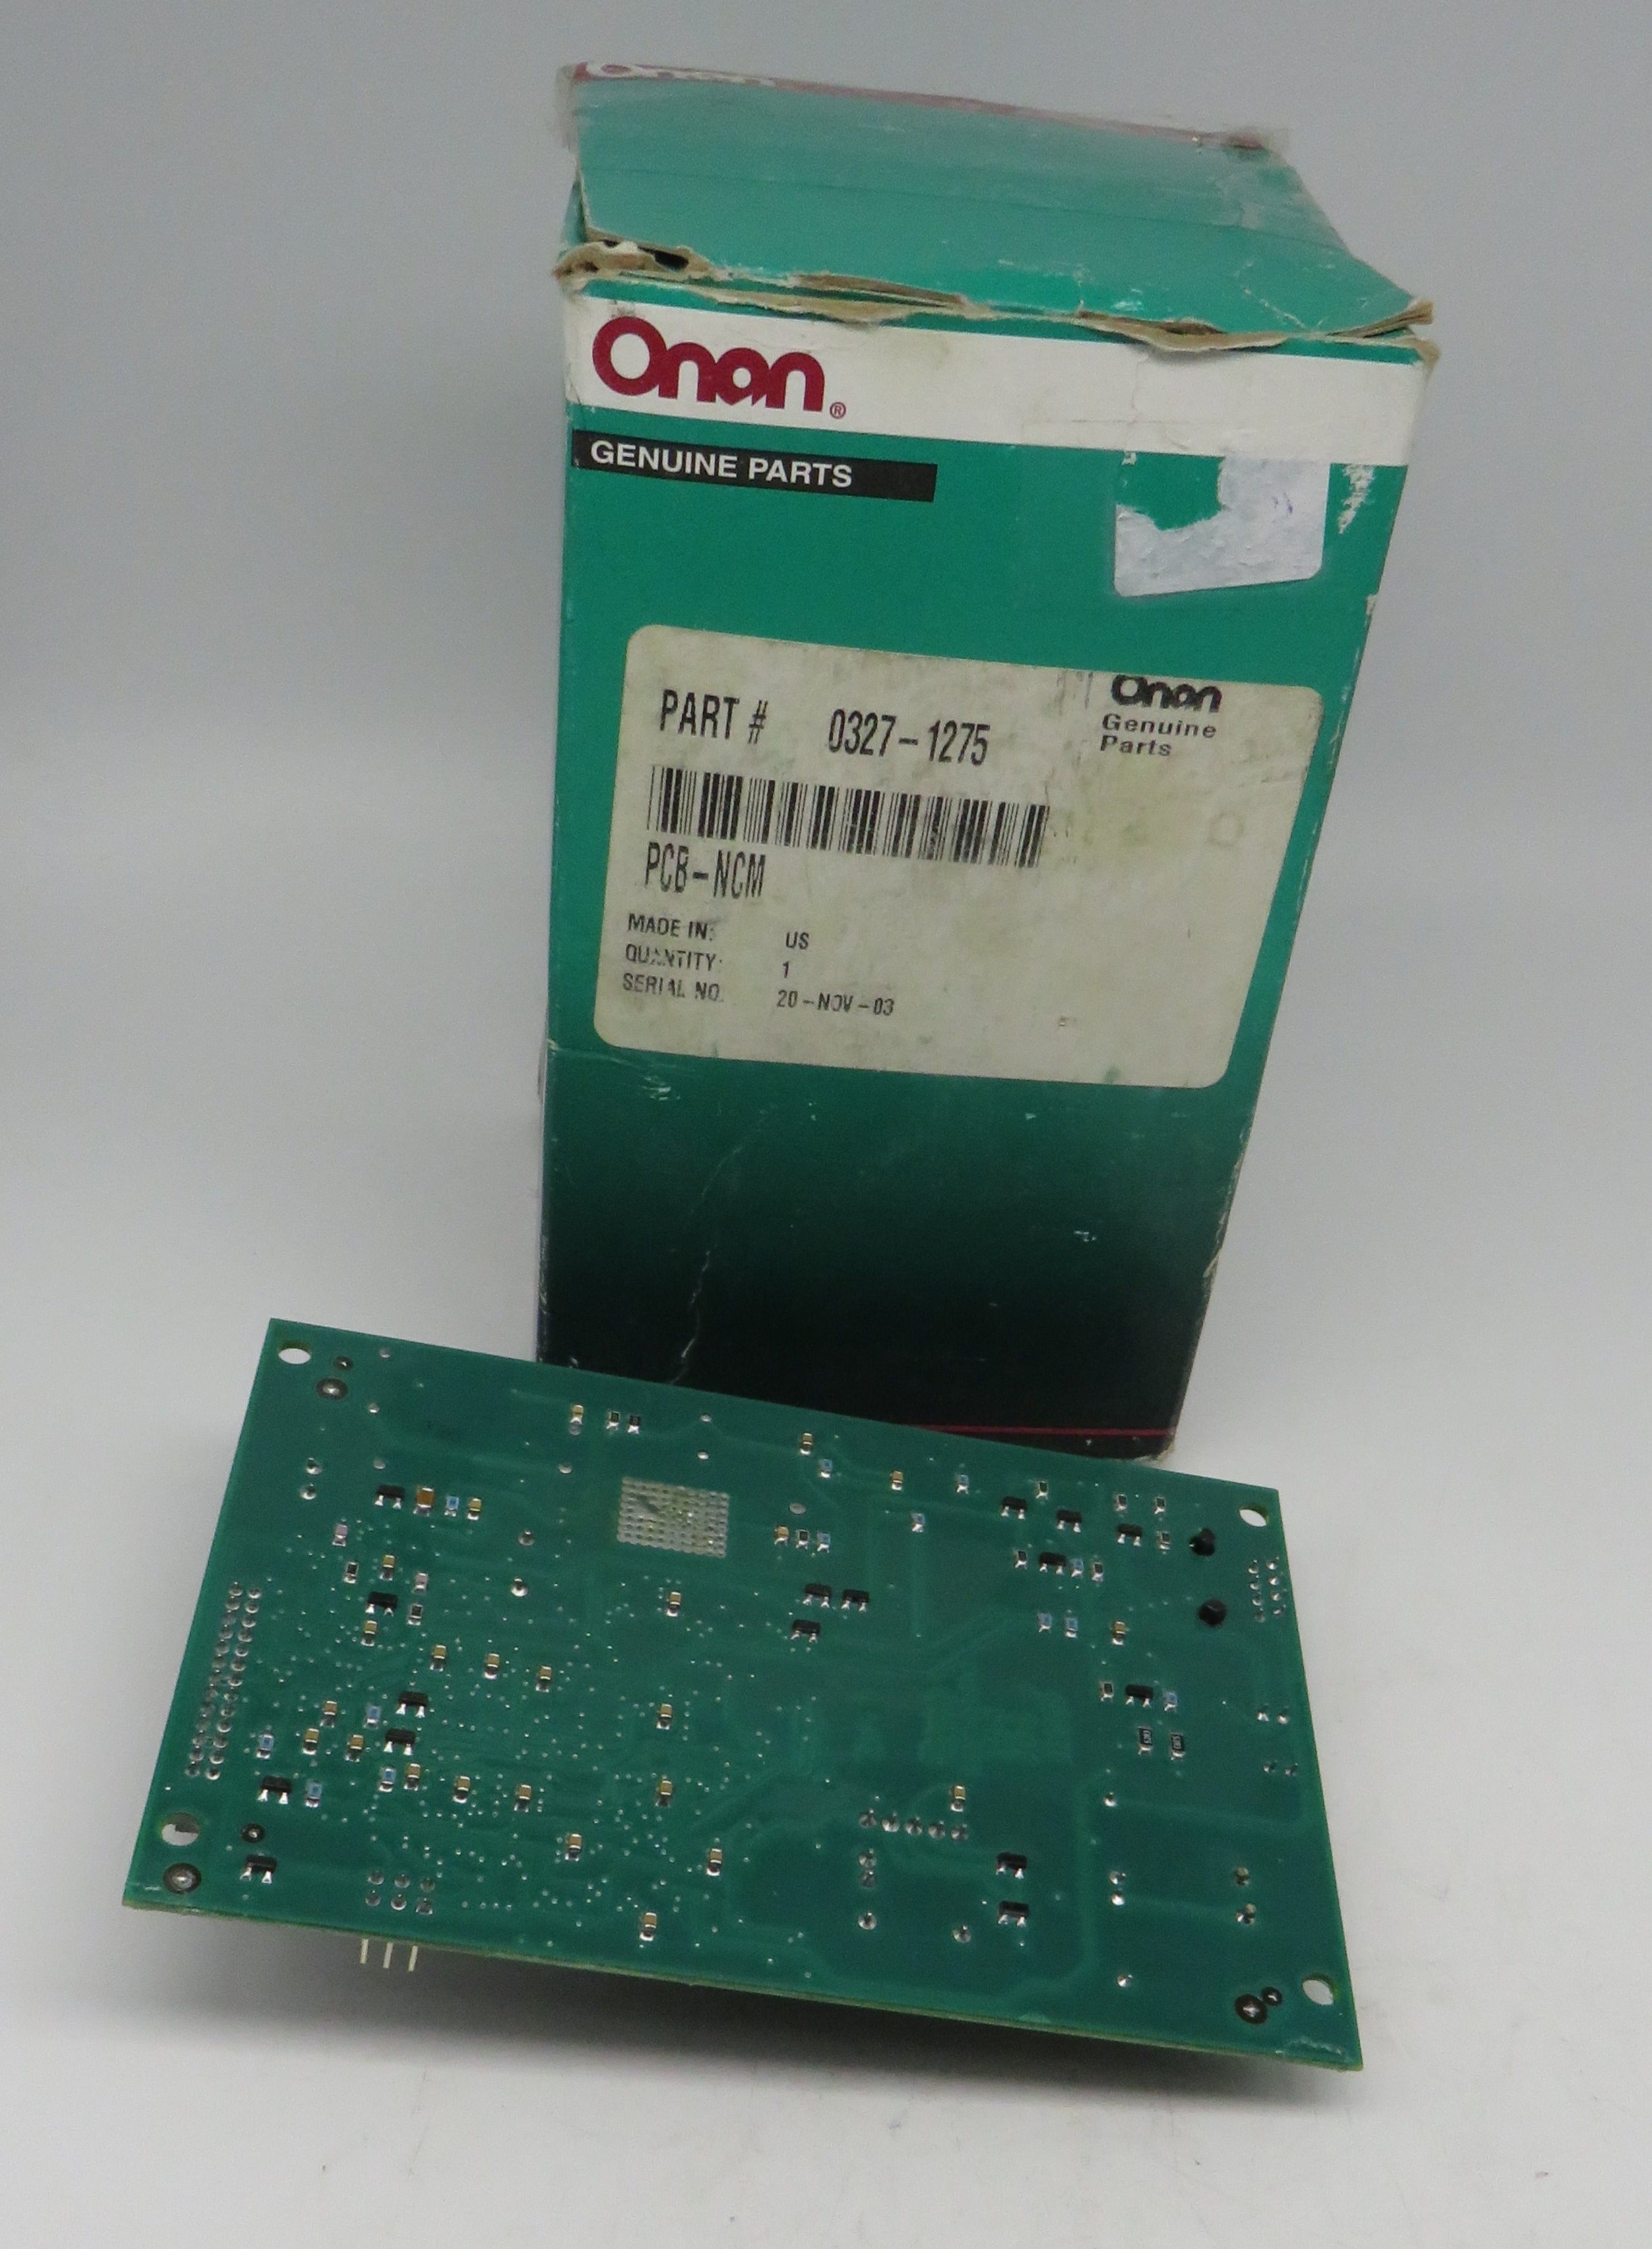 327-1275 Onan Board, Printed Circuit PCB-NCM For Control PCC2100 Genset with QSK23 Engine, Power Command 2100 and 3201 Controller For DQCA, DQCB & DQCC (Spec A-H) OBSOLETE 